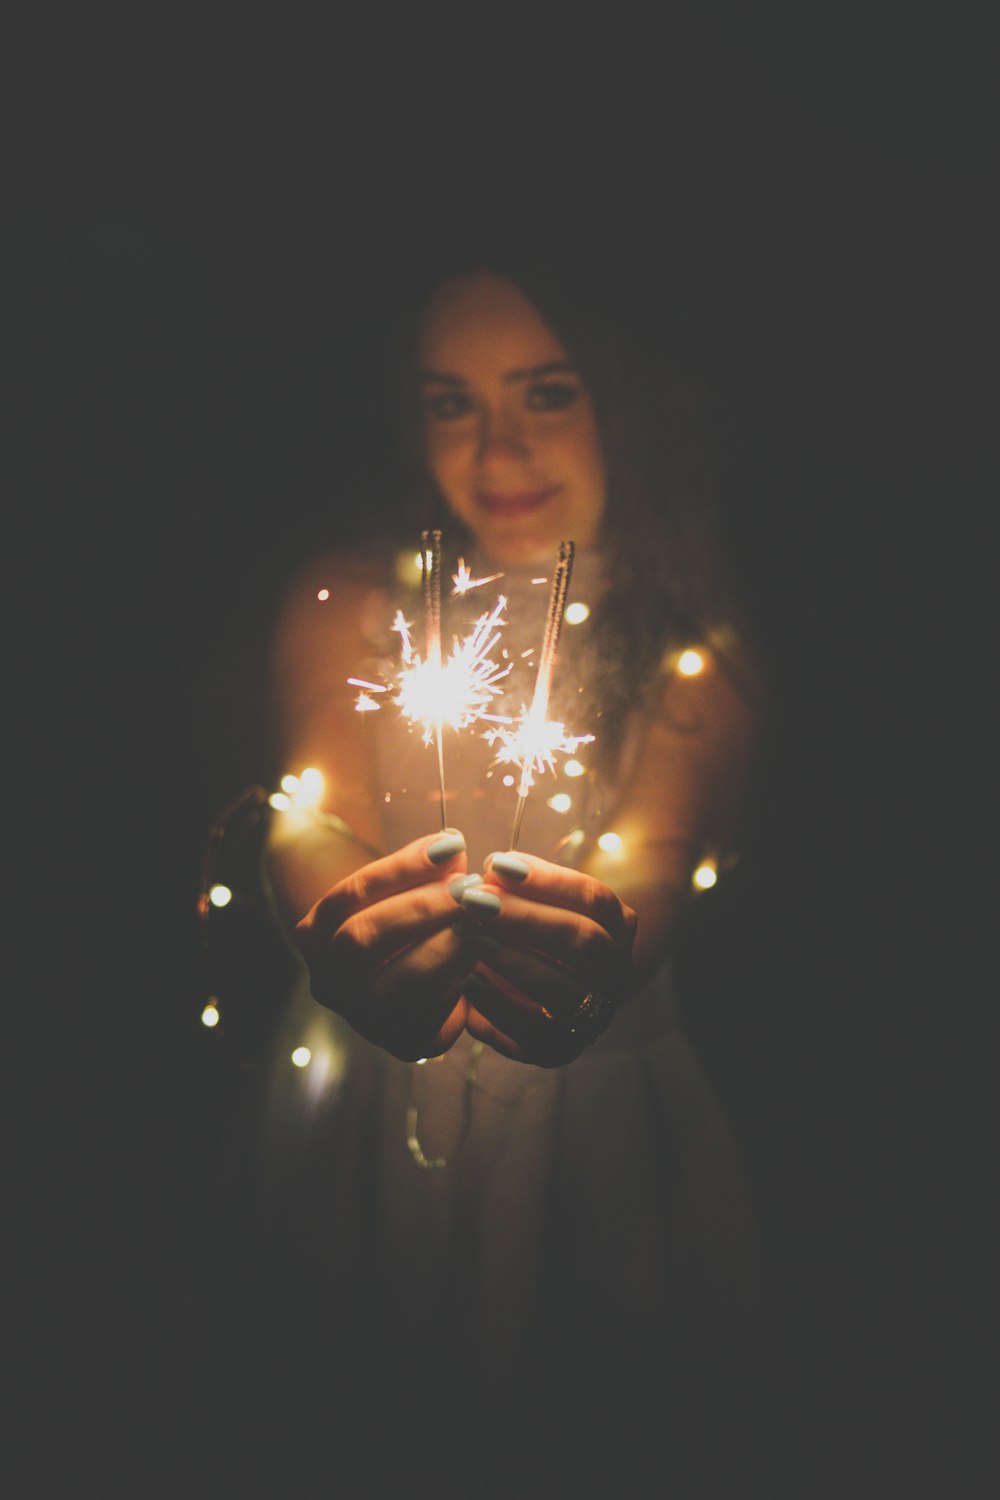 woman carrying two lighted sparklers against black background